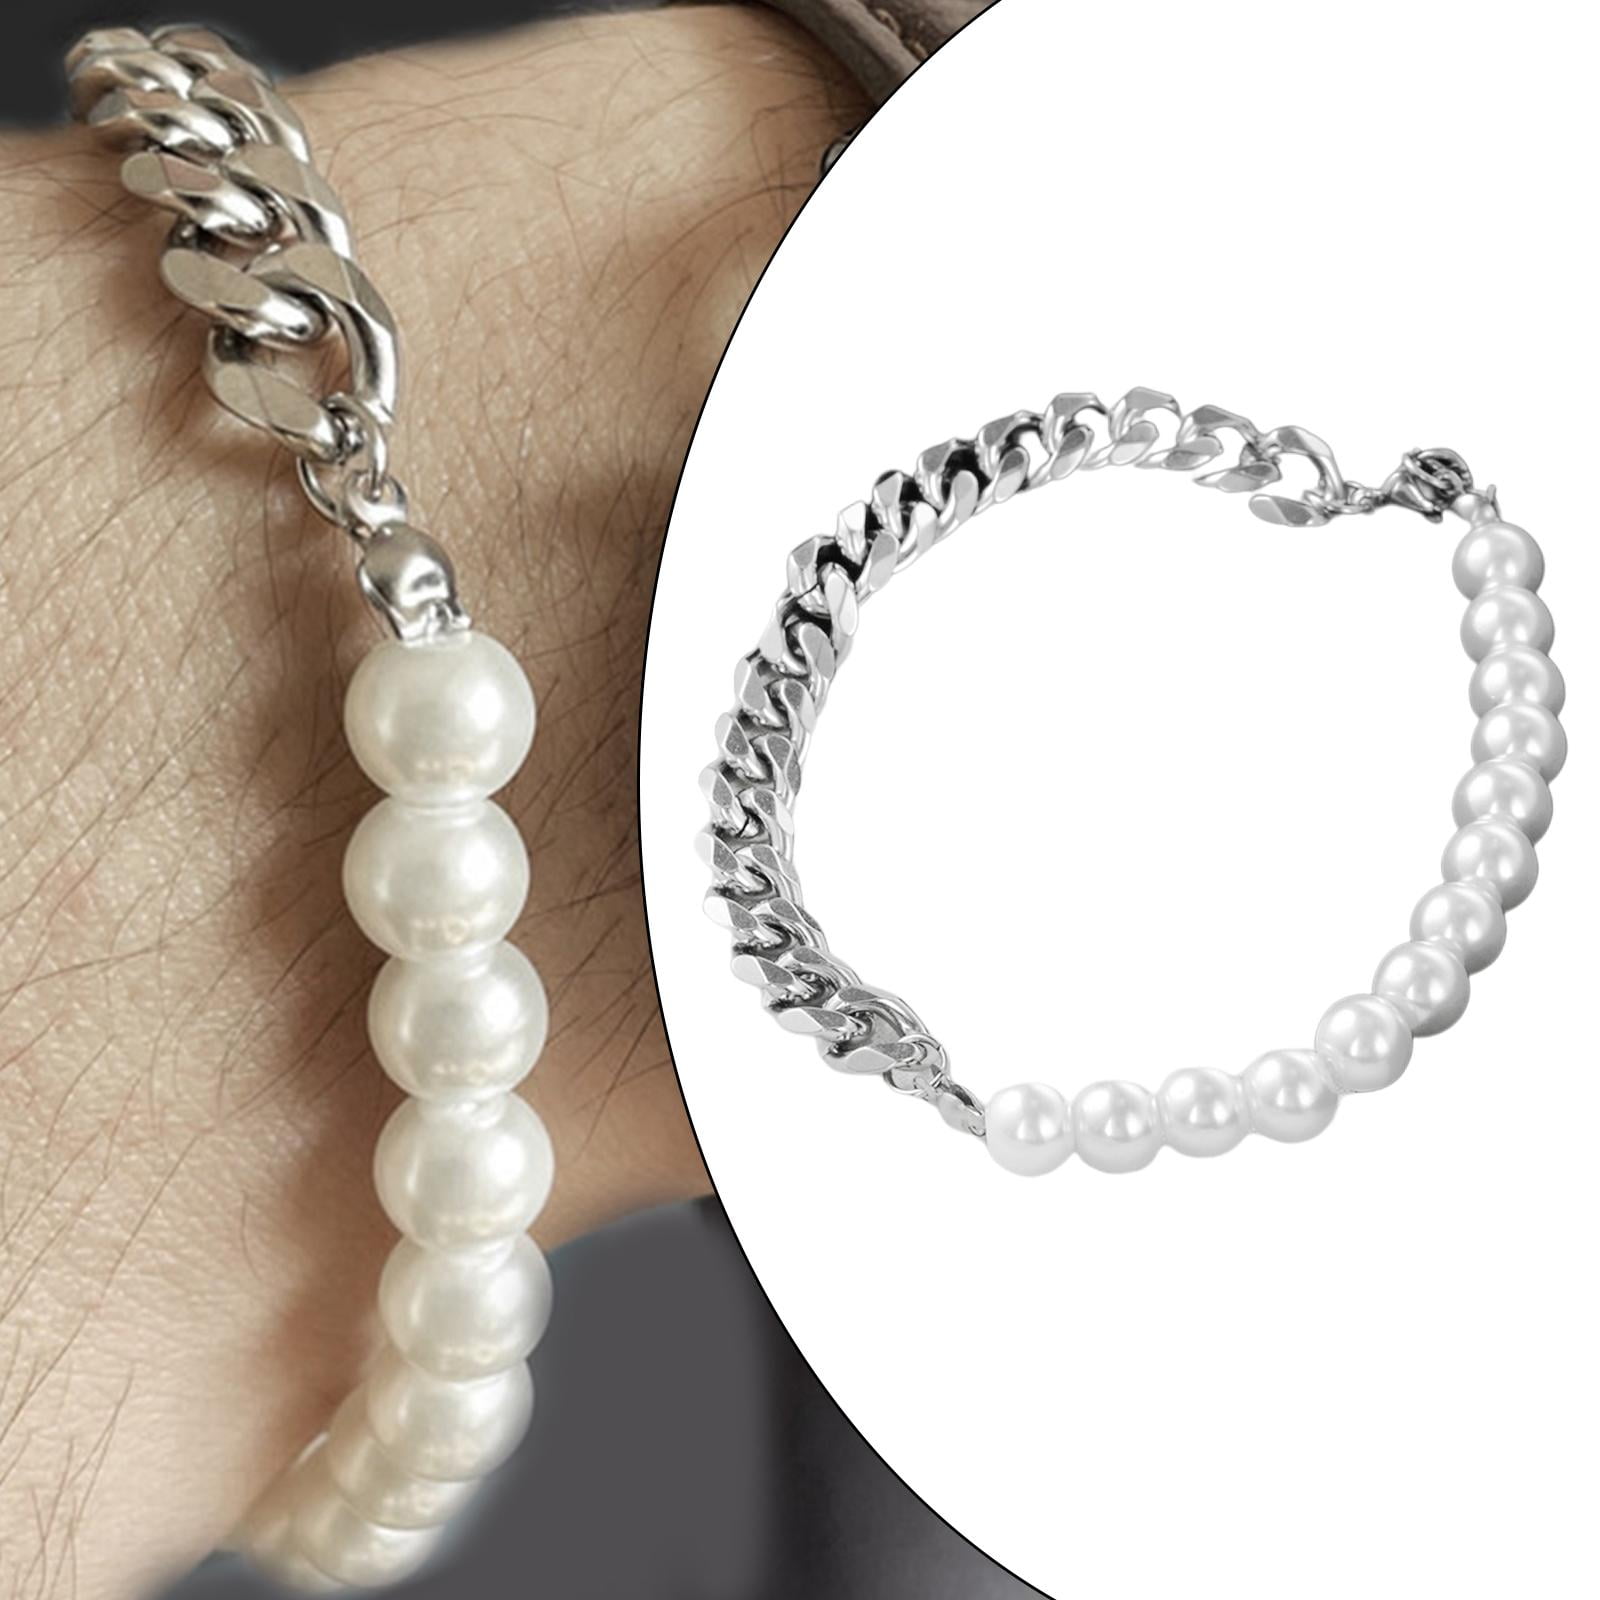 Gifts for Him: Baroque pearl bracelets, men's chains.